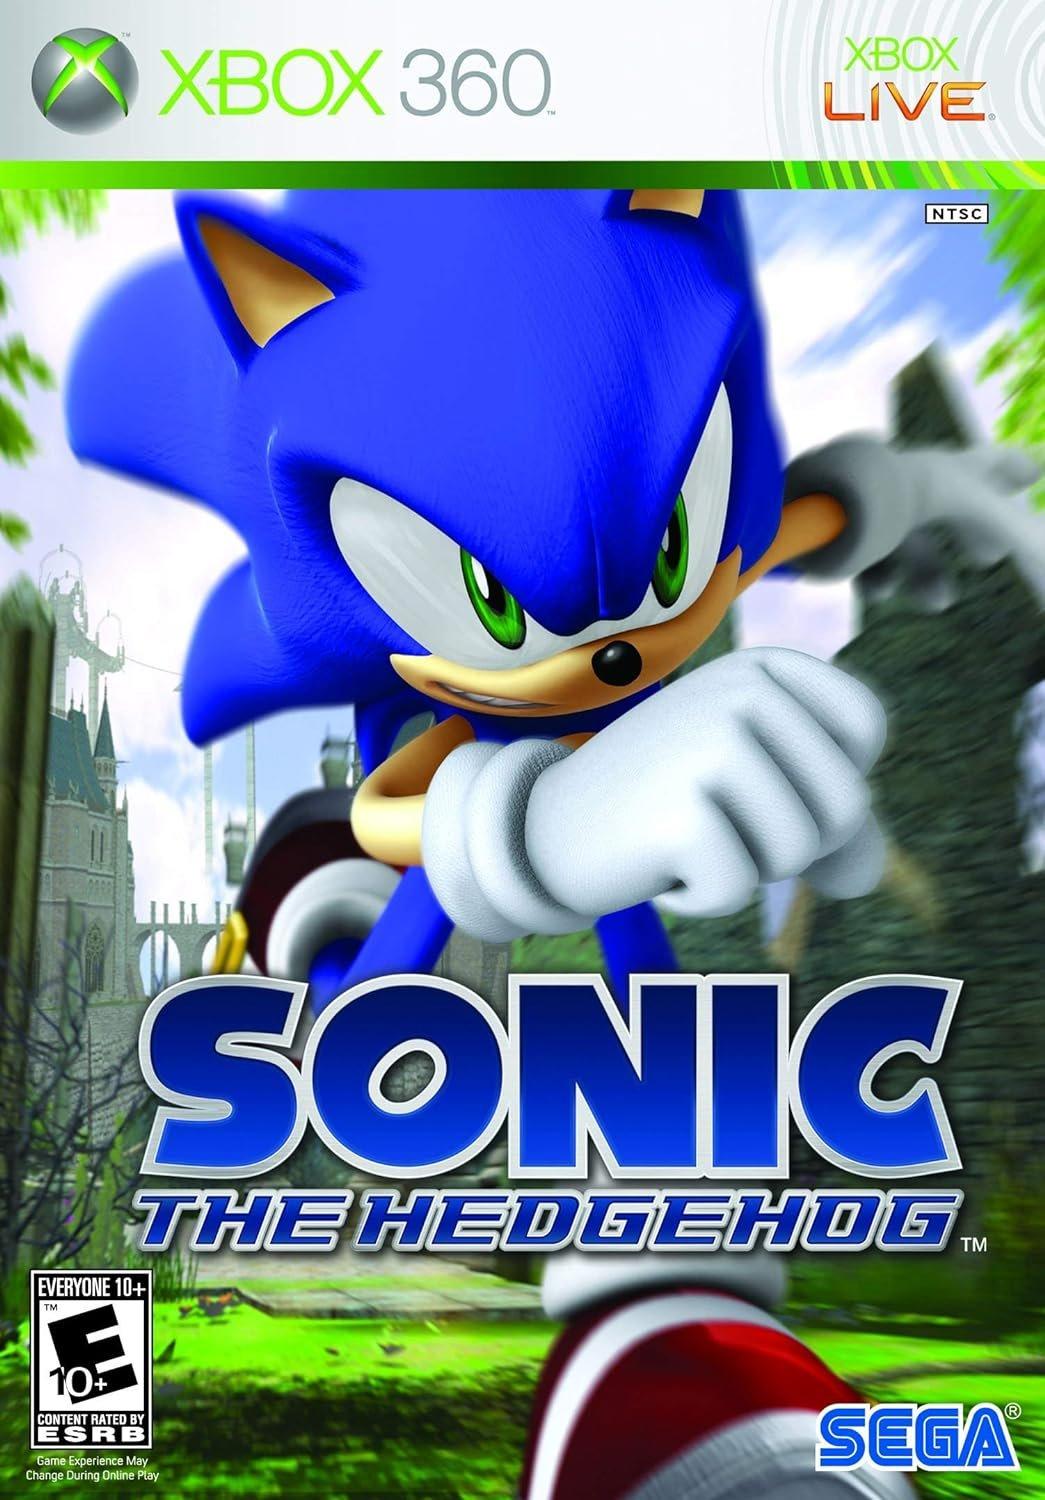 Play Genesis Sonic the Hedgehog 2 (World) Online in your browser 